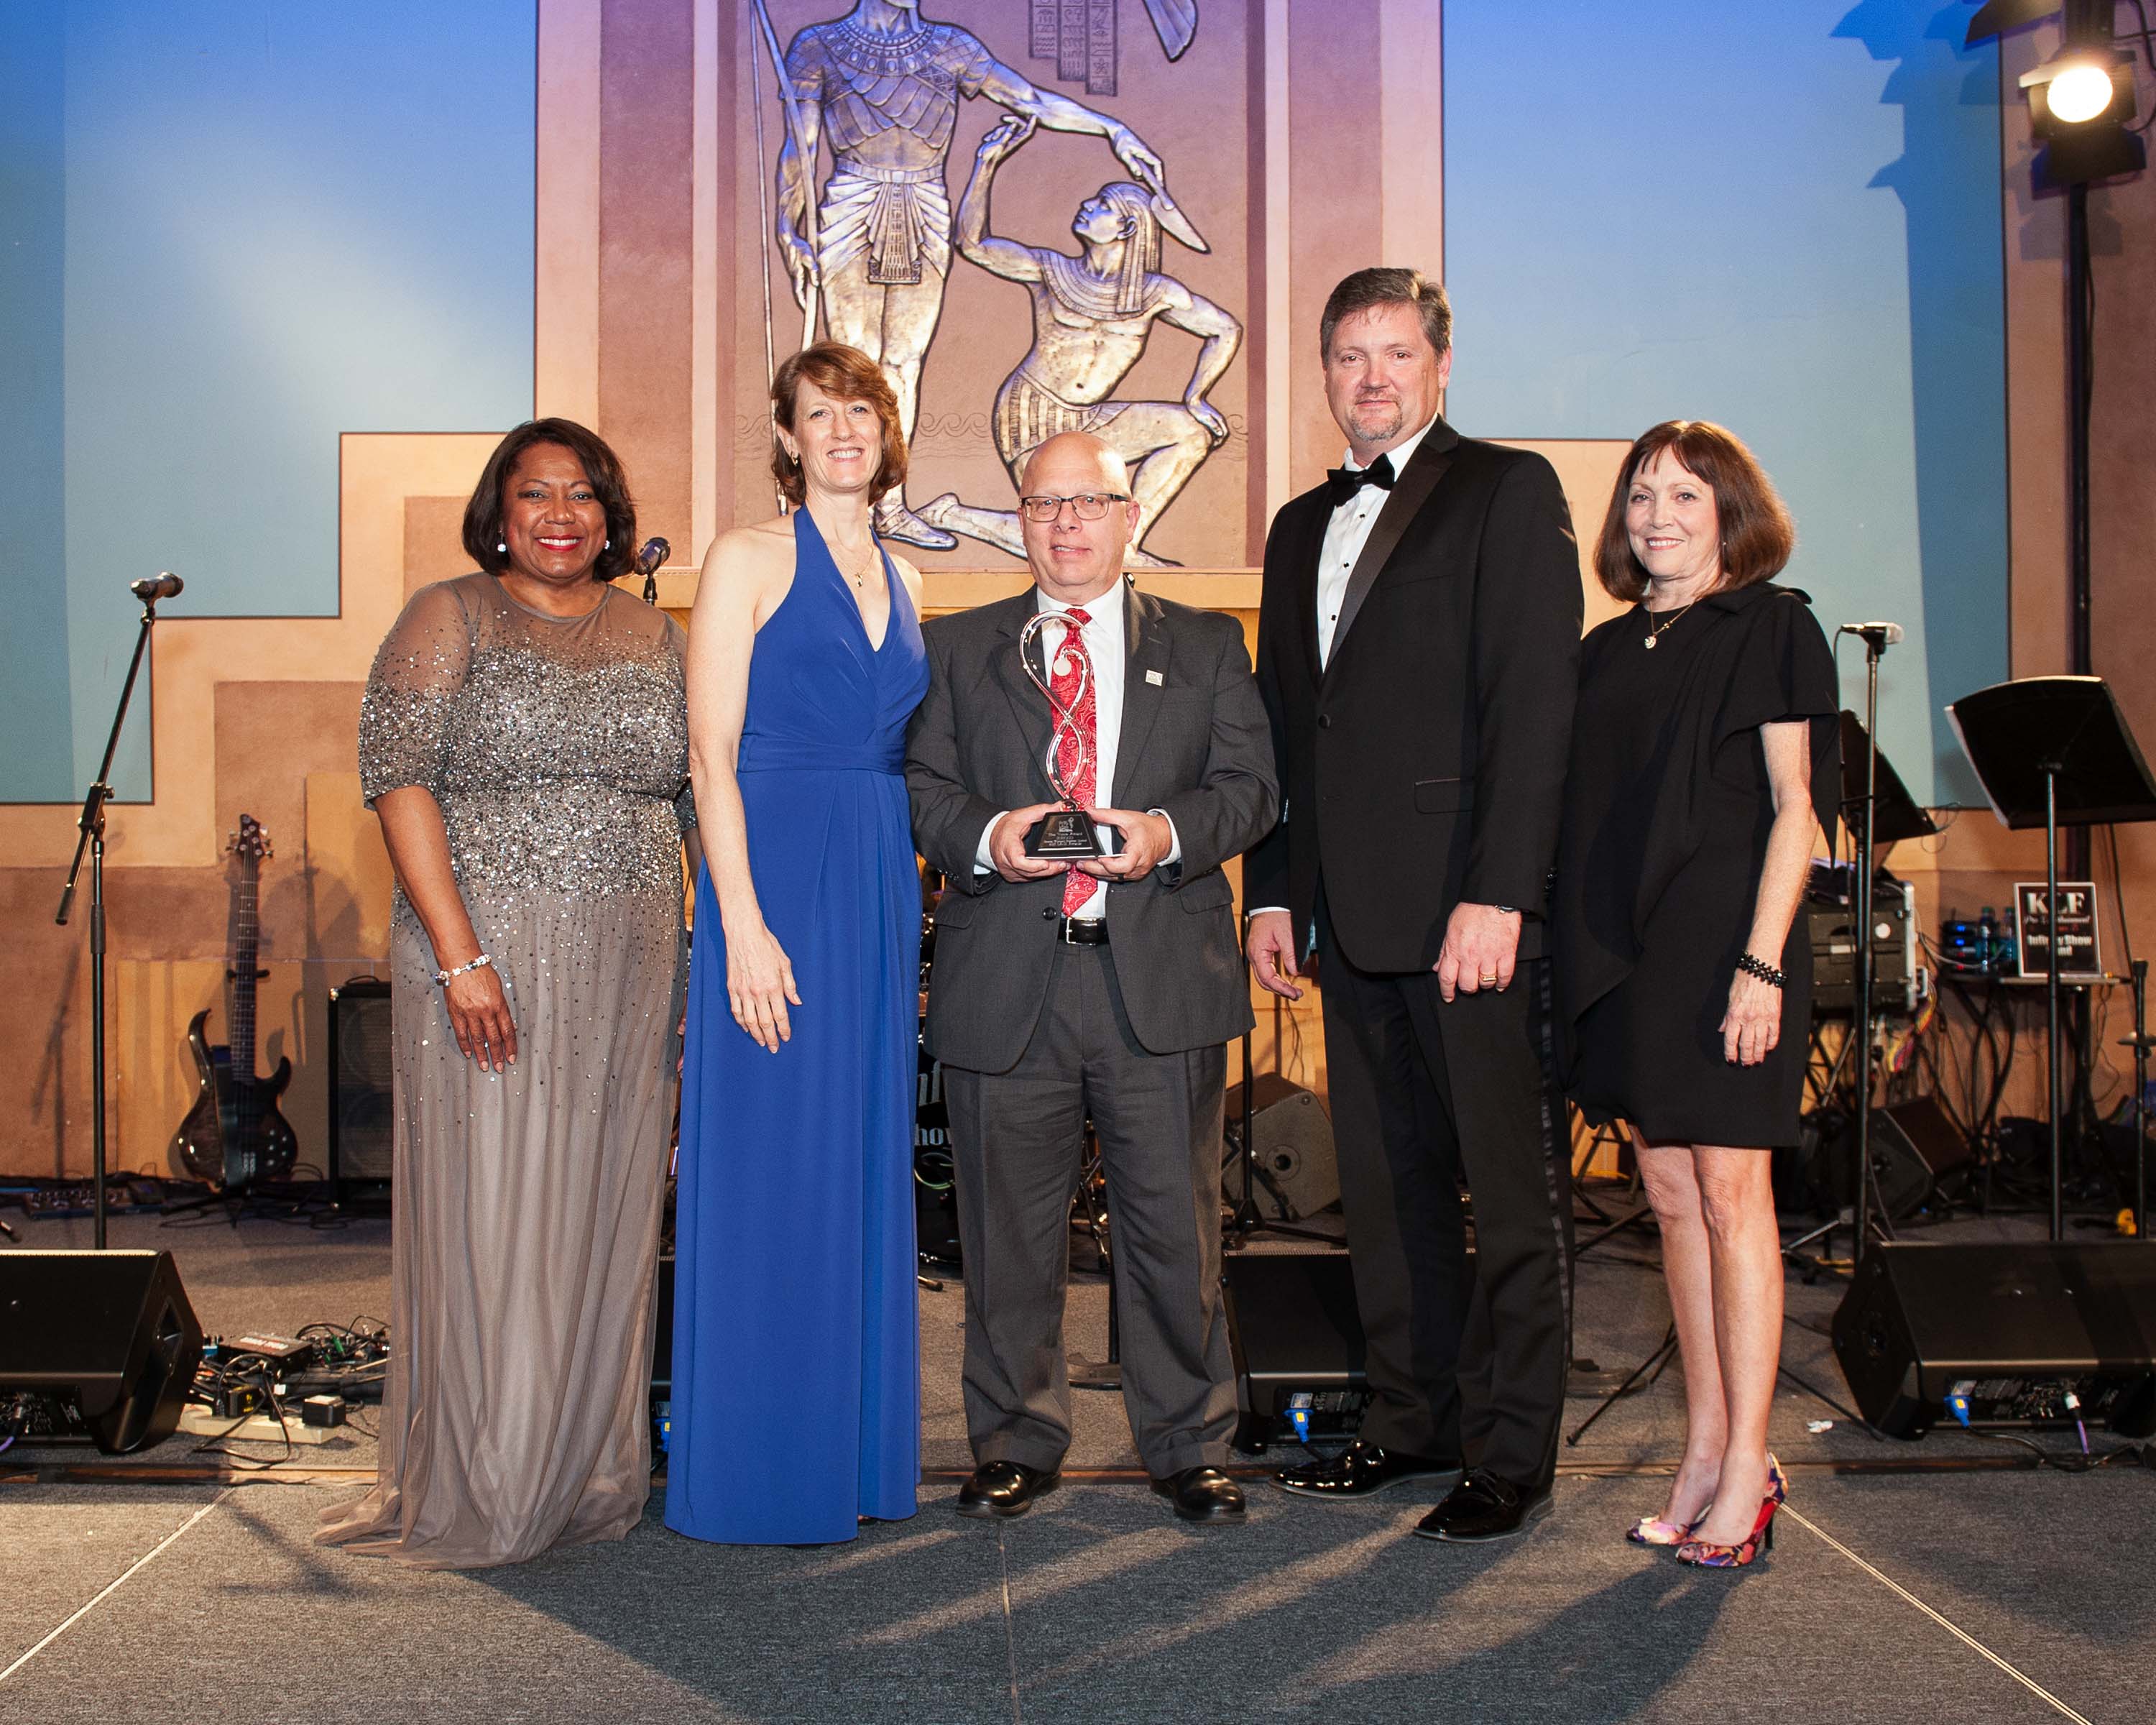 (Center) SONOCO Wins Coveted Voice Award During 2015 GWBC LACE Awards